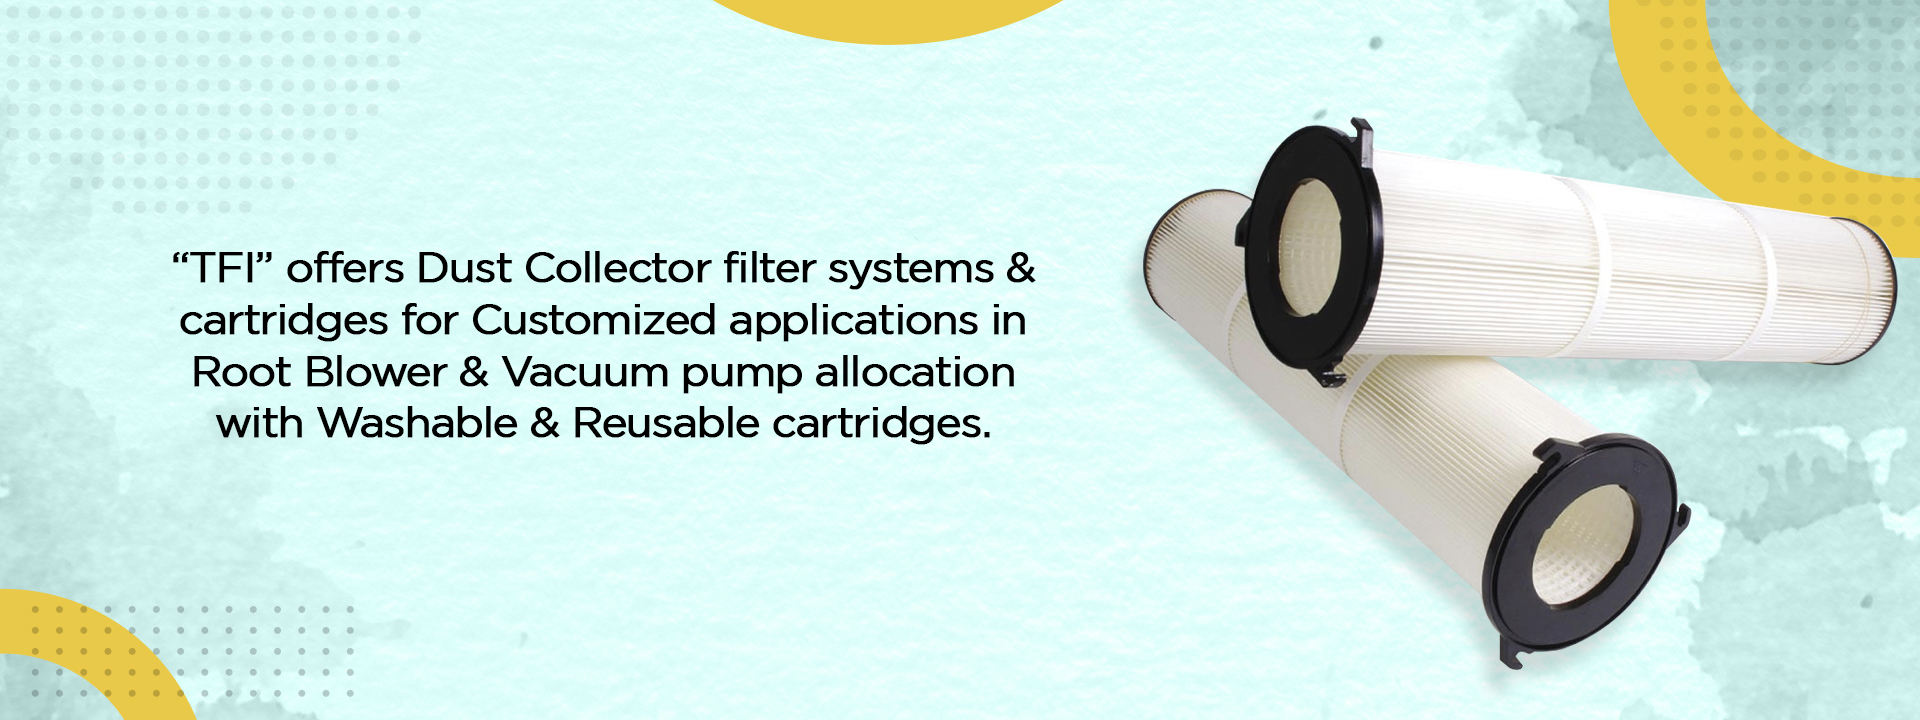 Dust Collector Filter Systems and Cartridges